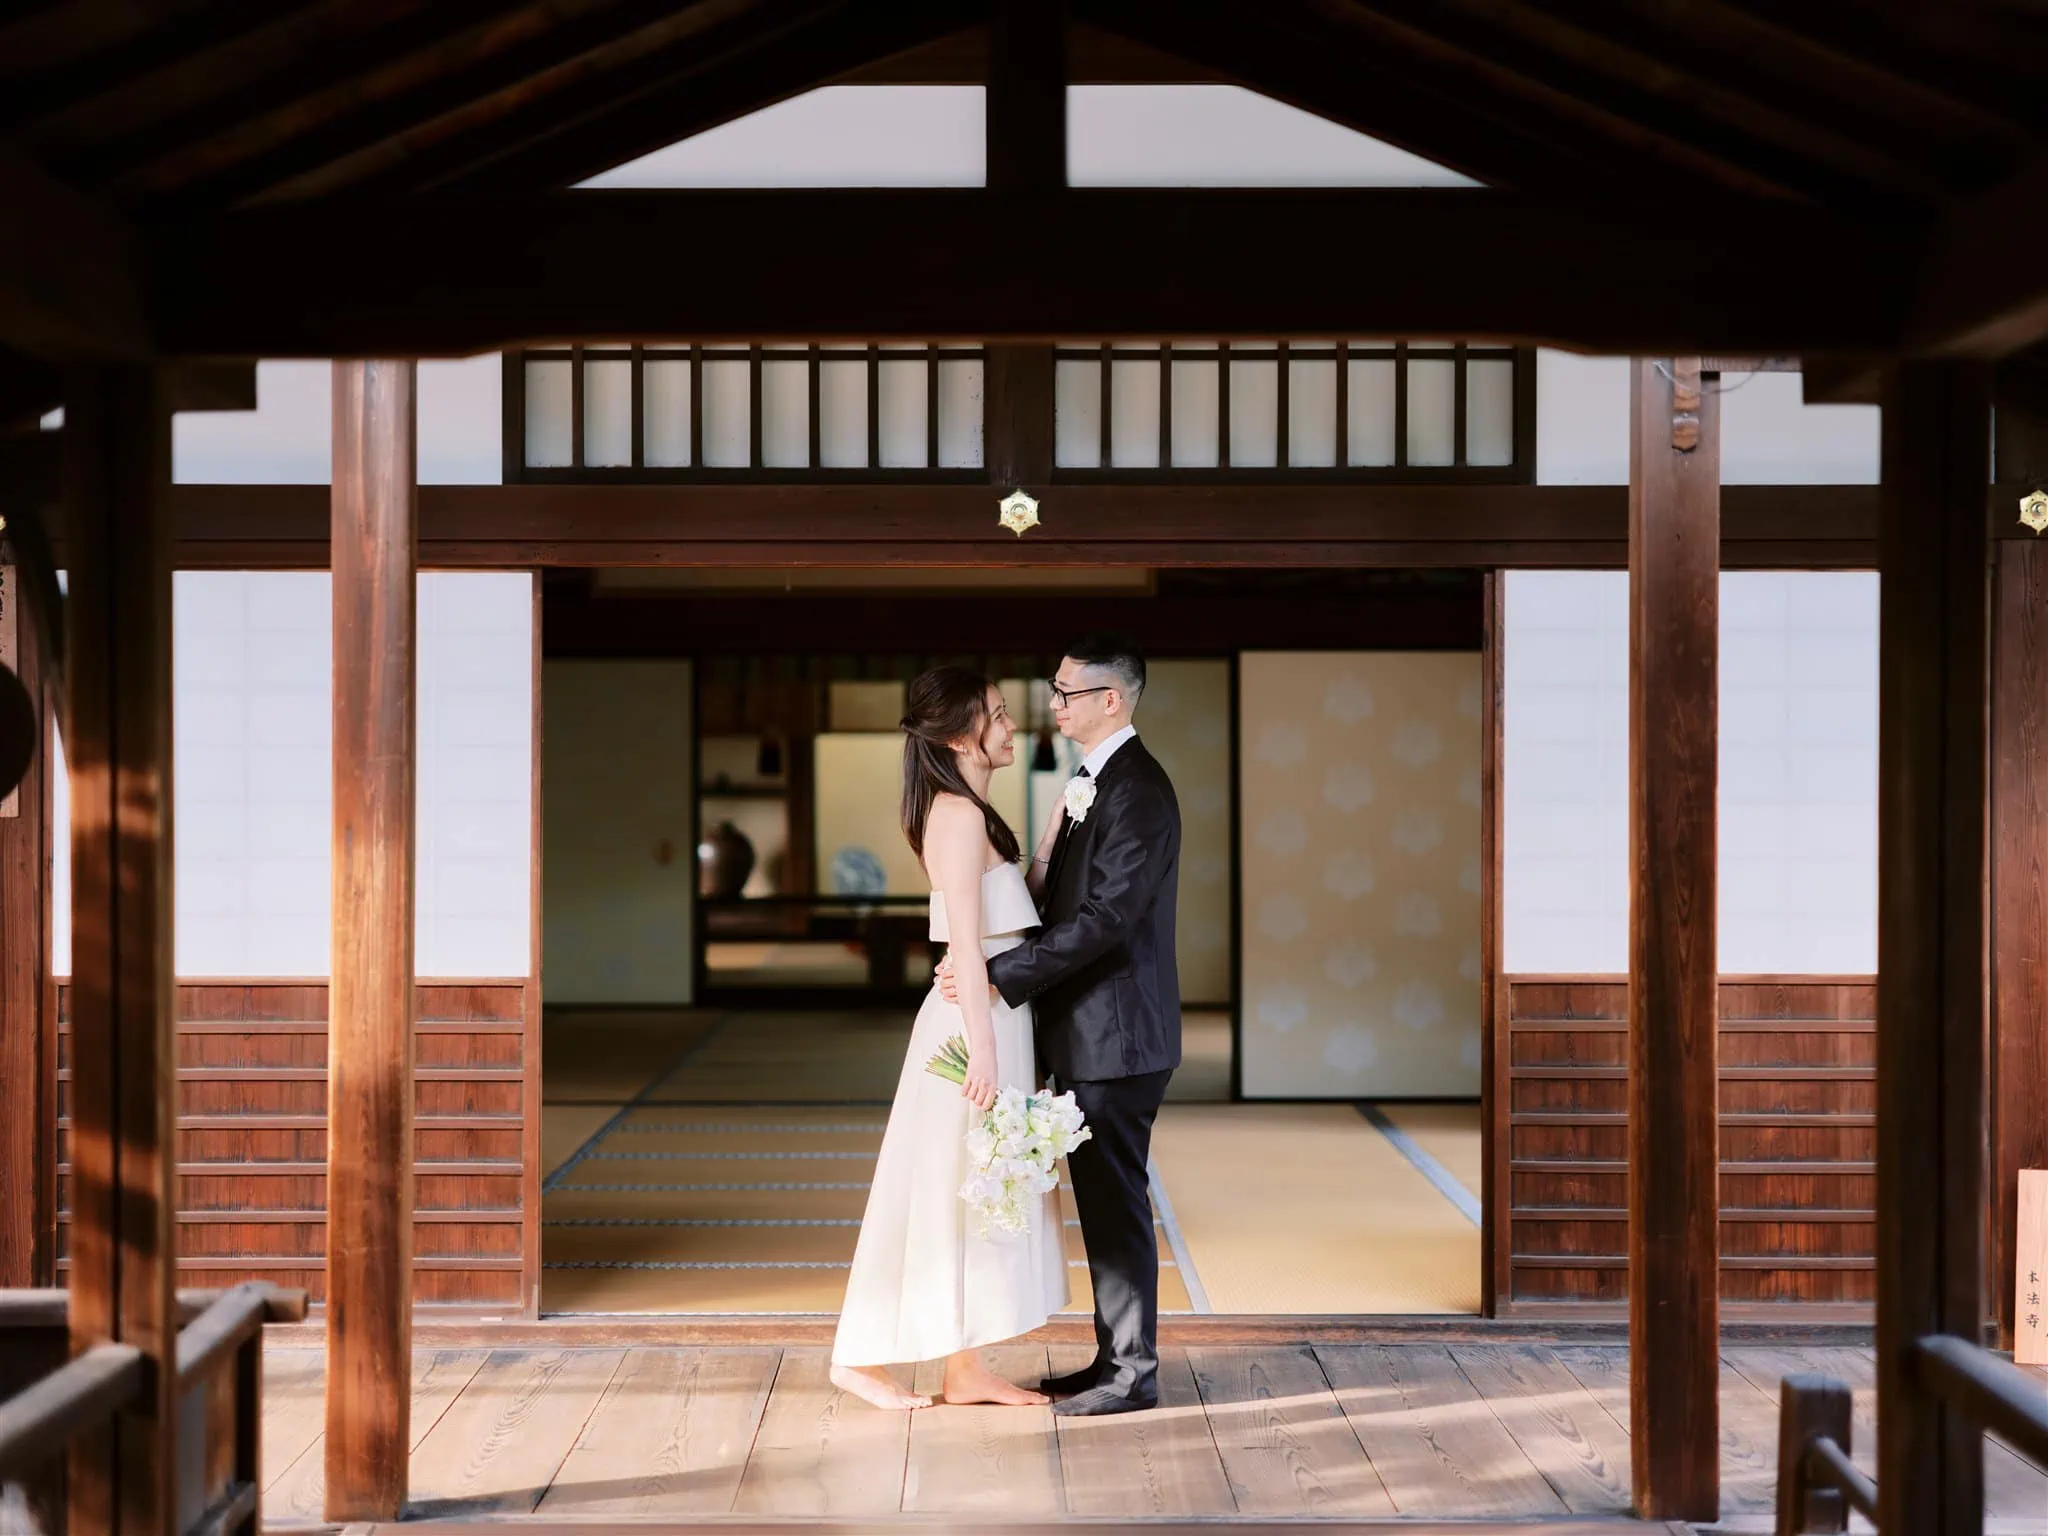 Kyoto Tokyo Japan Elopement Wedding Photographer, Planner & Videographer | A Japan elopement with a bride and groom standing in front of a wooden structure.